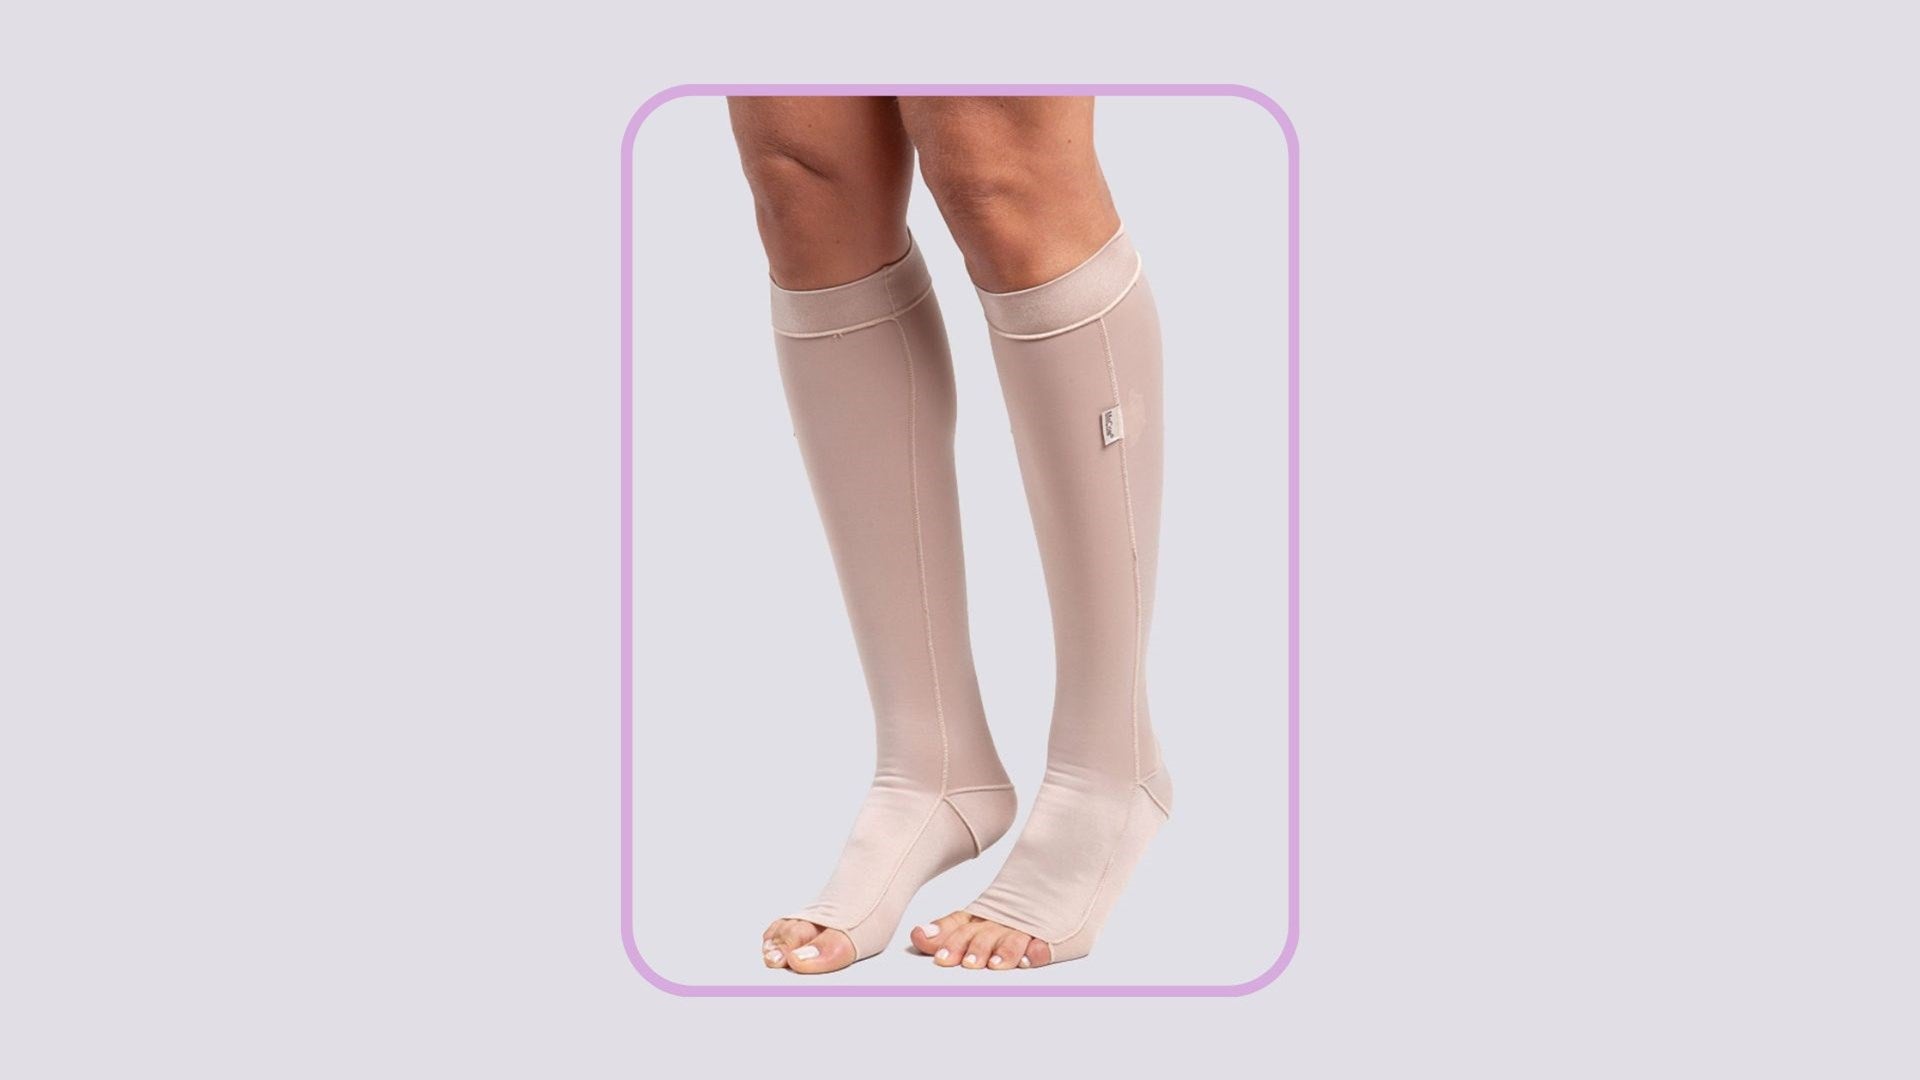 Do I Really Need Compression Socks? 5 Signs to Look For